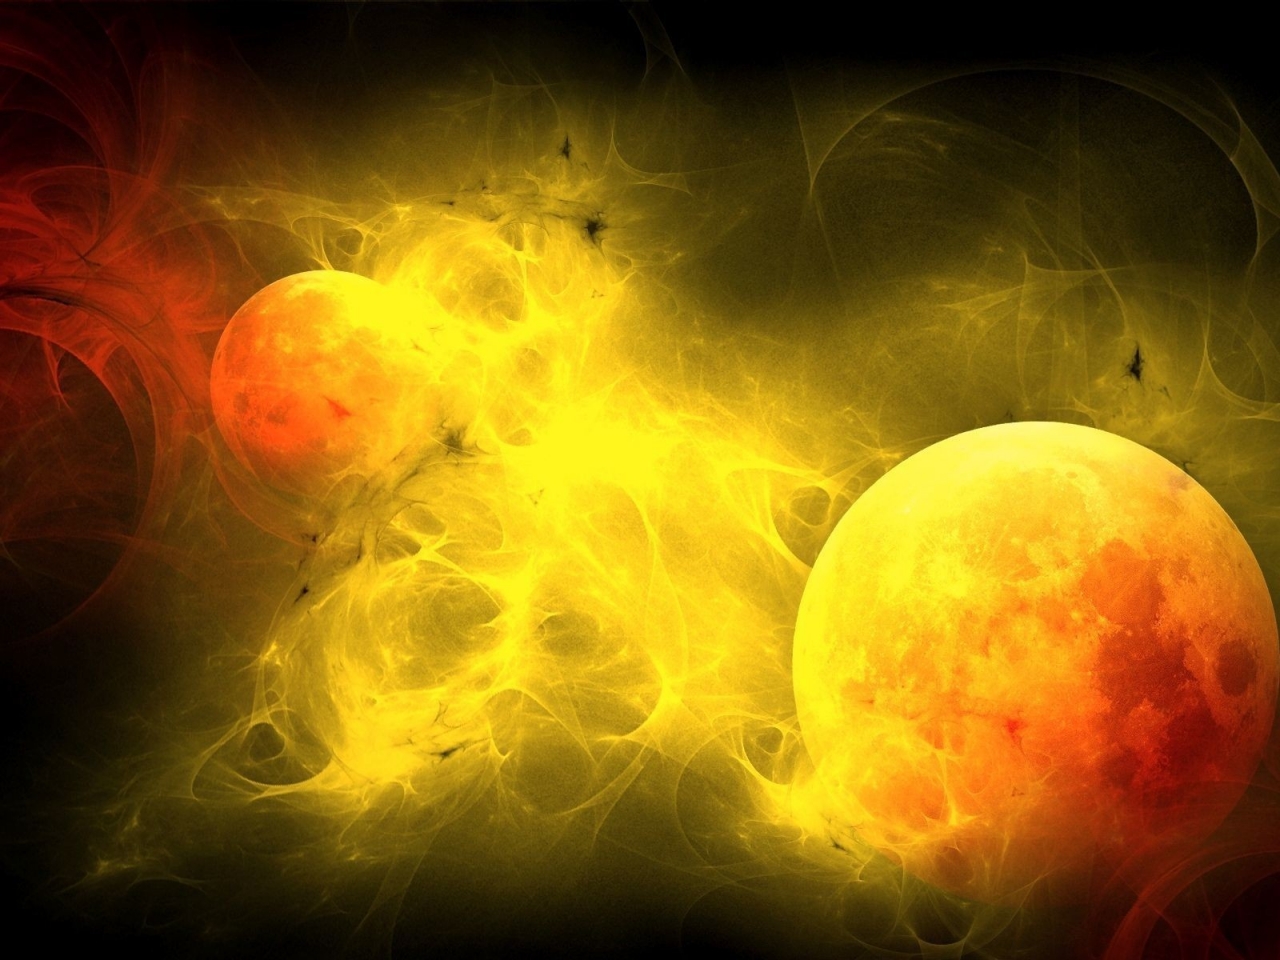 Fire Planets for 1280 x 960 resolution